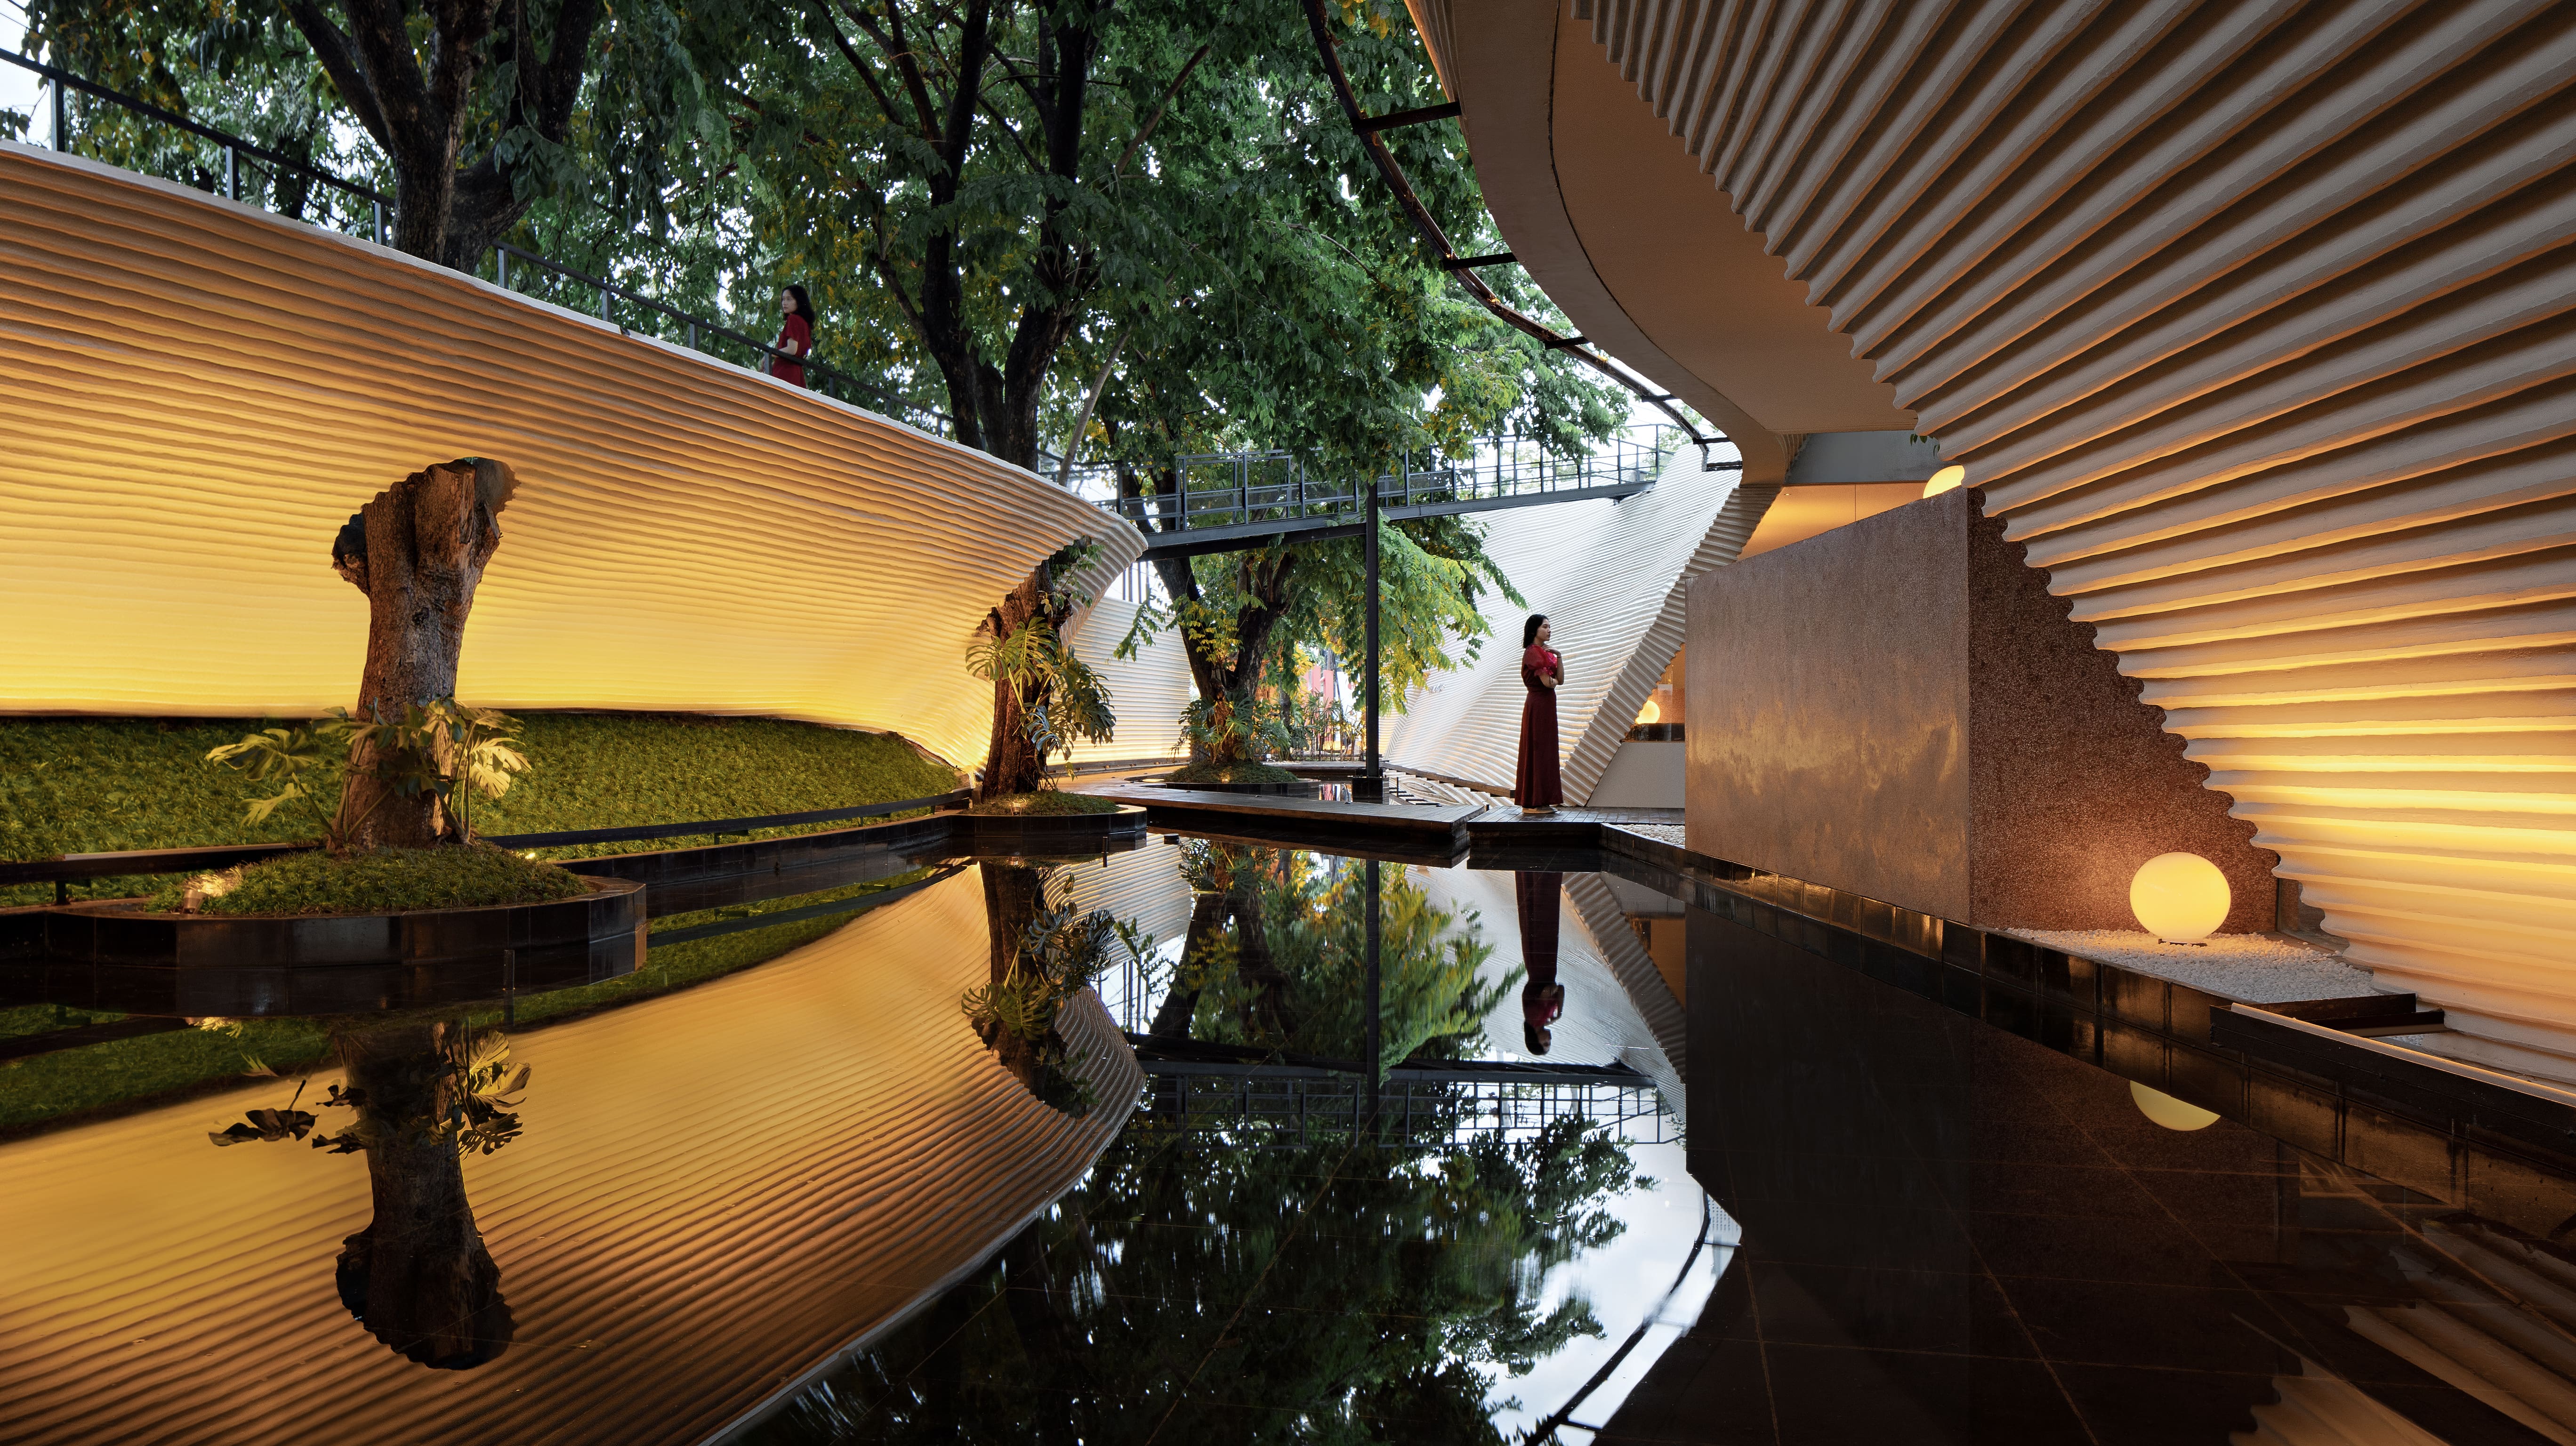 Tanatap Wall Garden, A Space Born from Essential Architecture